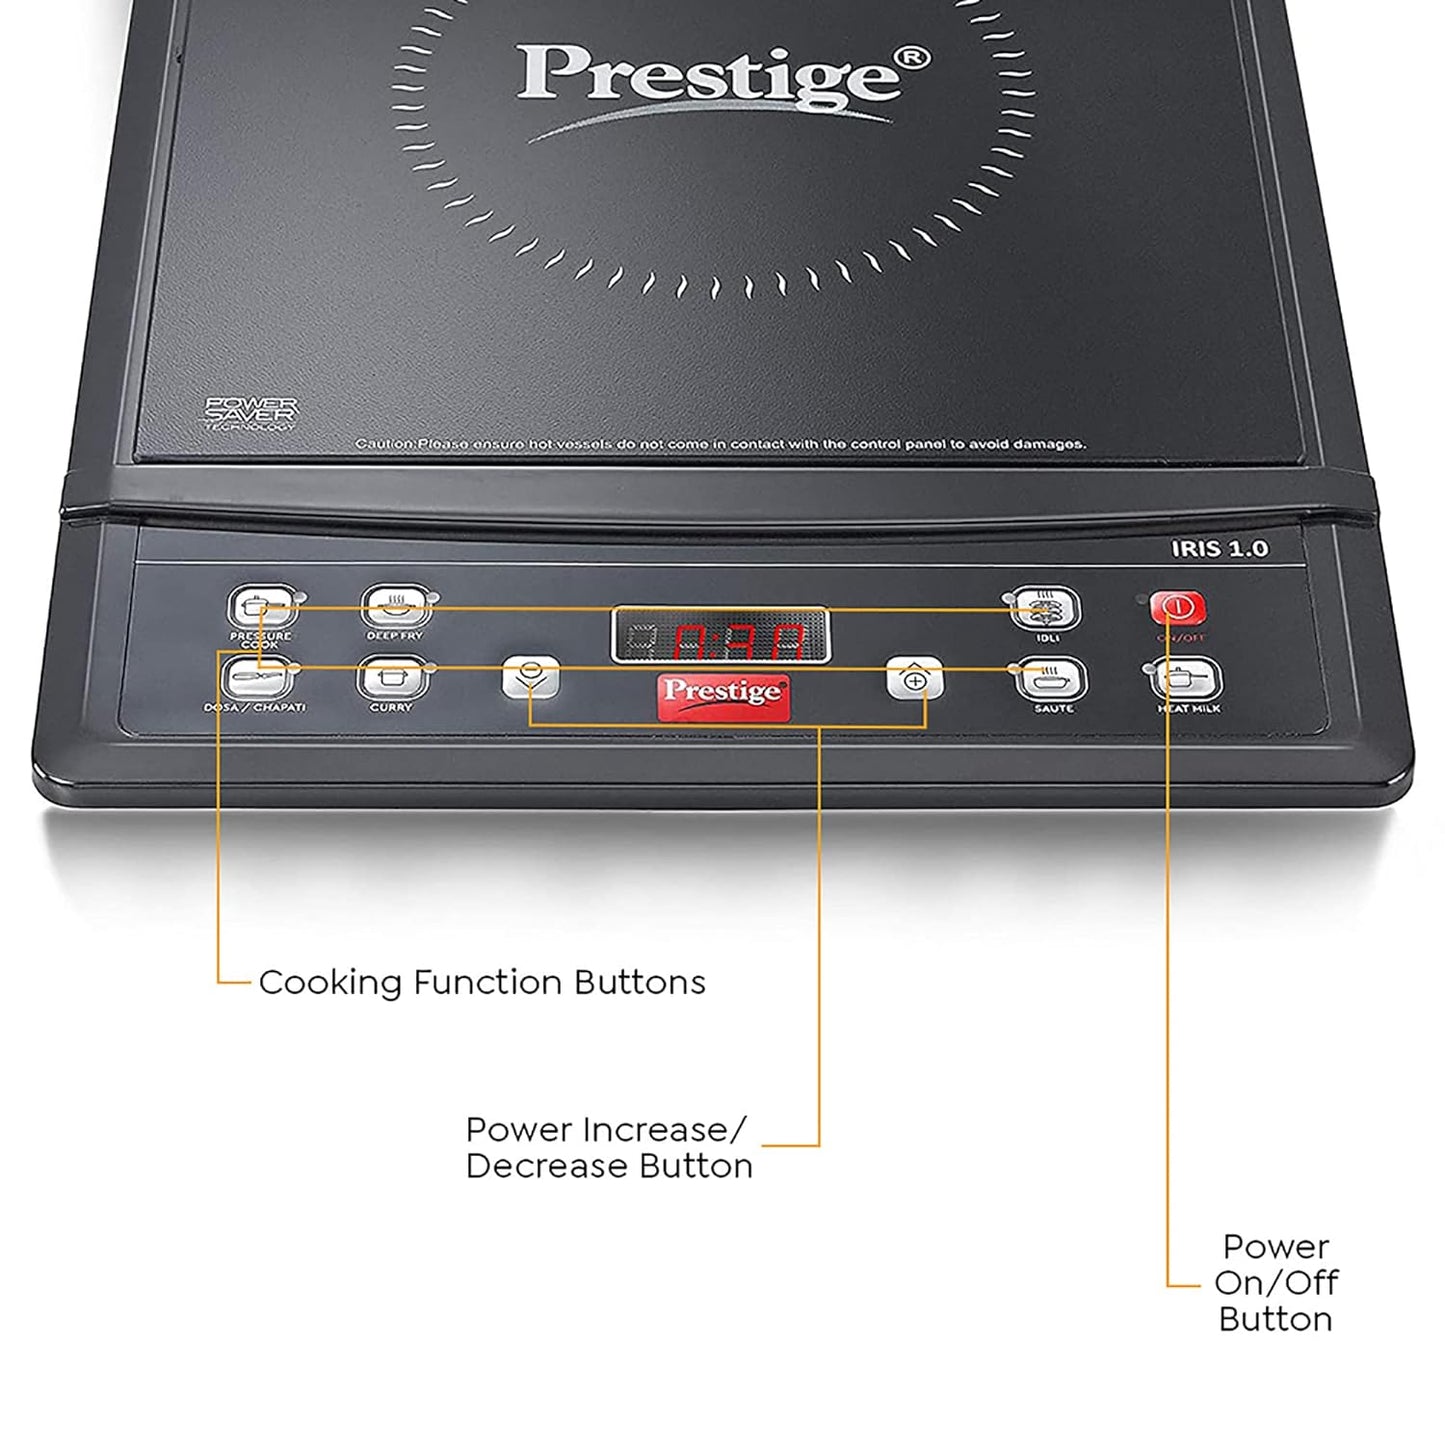 Prestige IRIS ECO 1200 W Induction Cooktop with automatic voltage regulator |Indian Menu option|Power Saver|Timer with User Pre-Set|Black